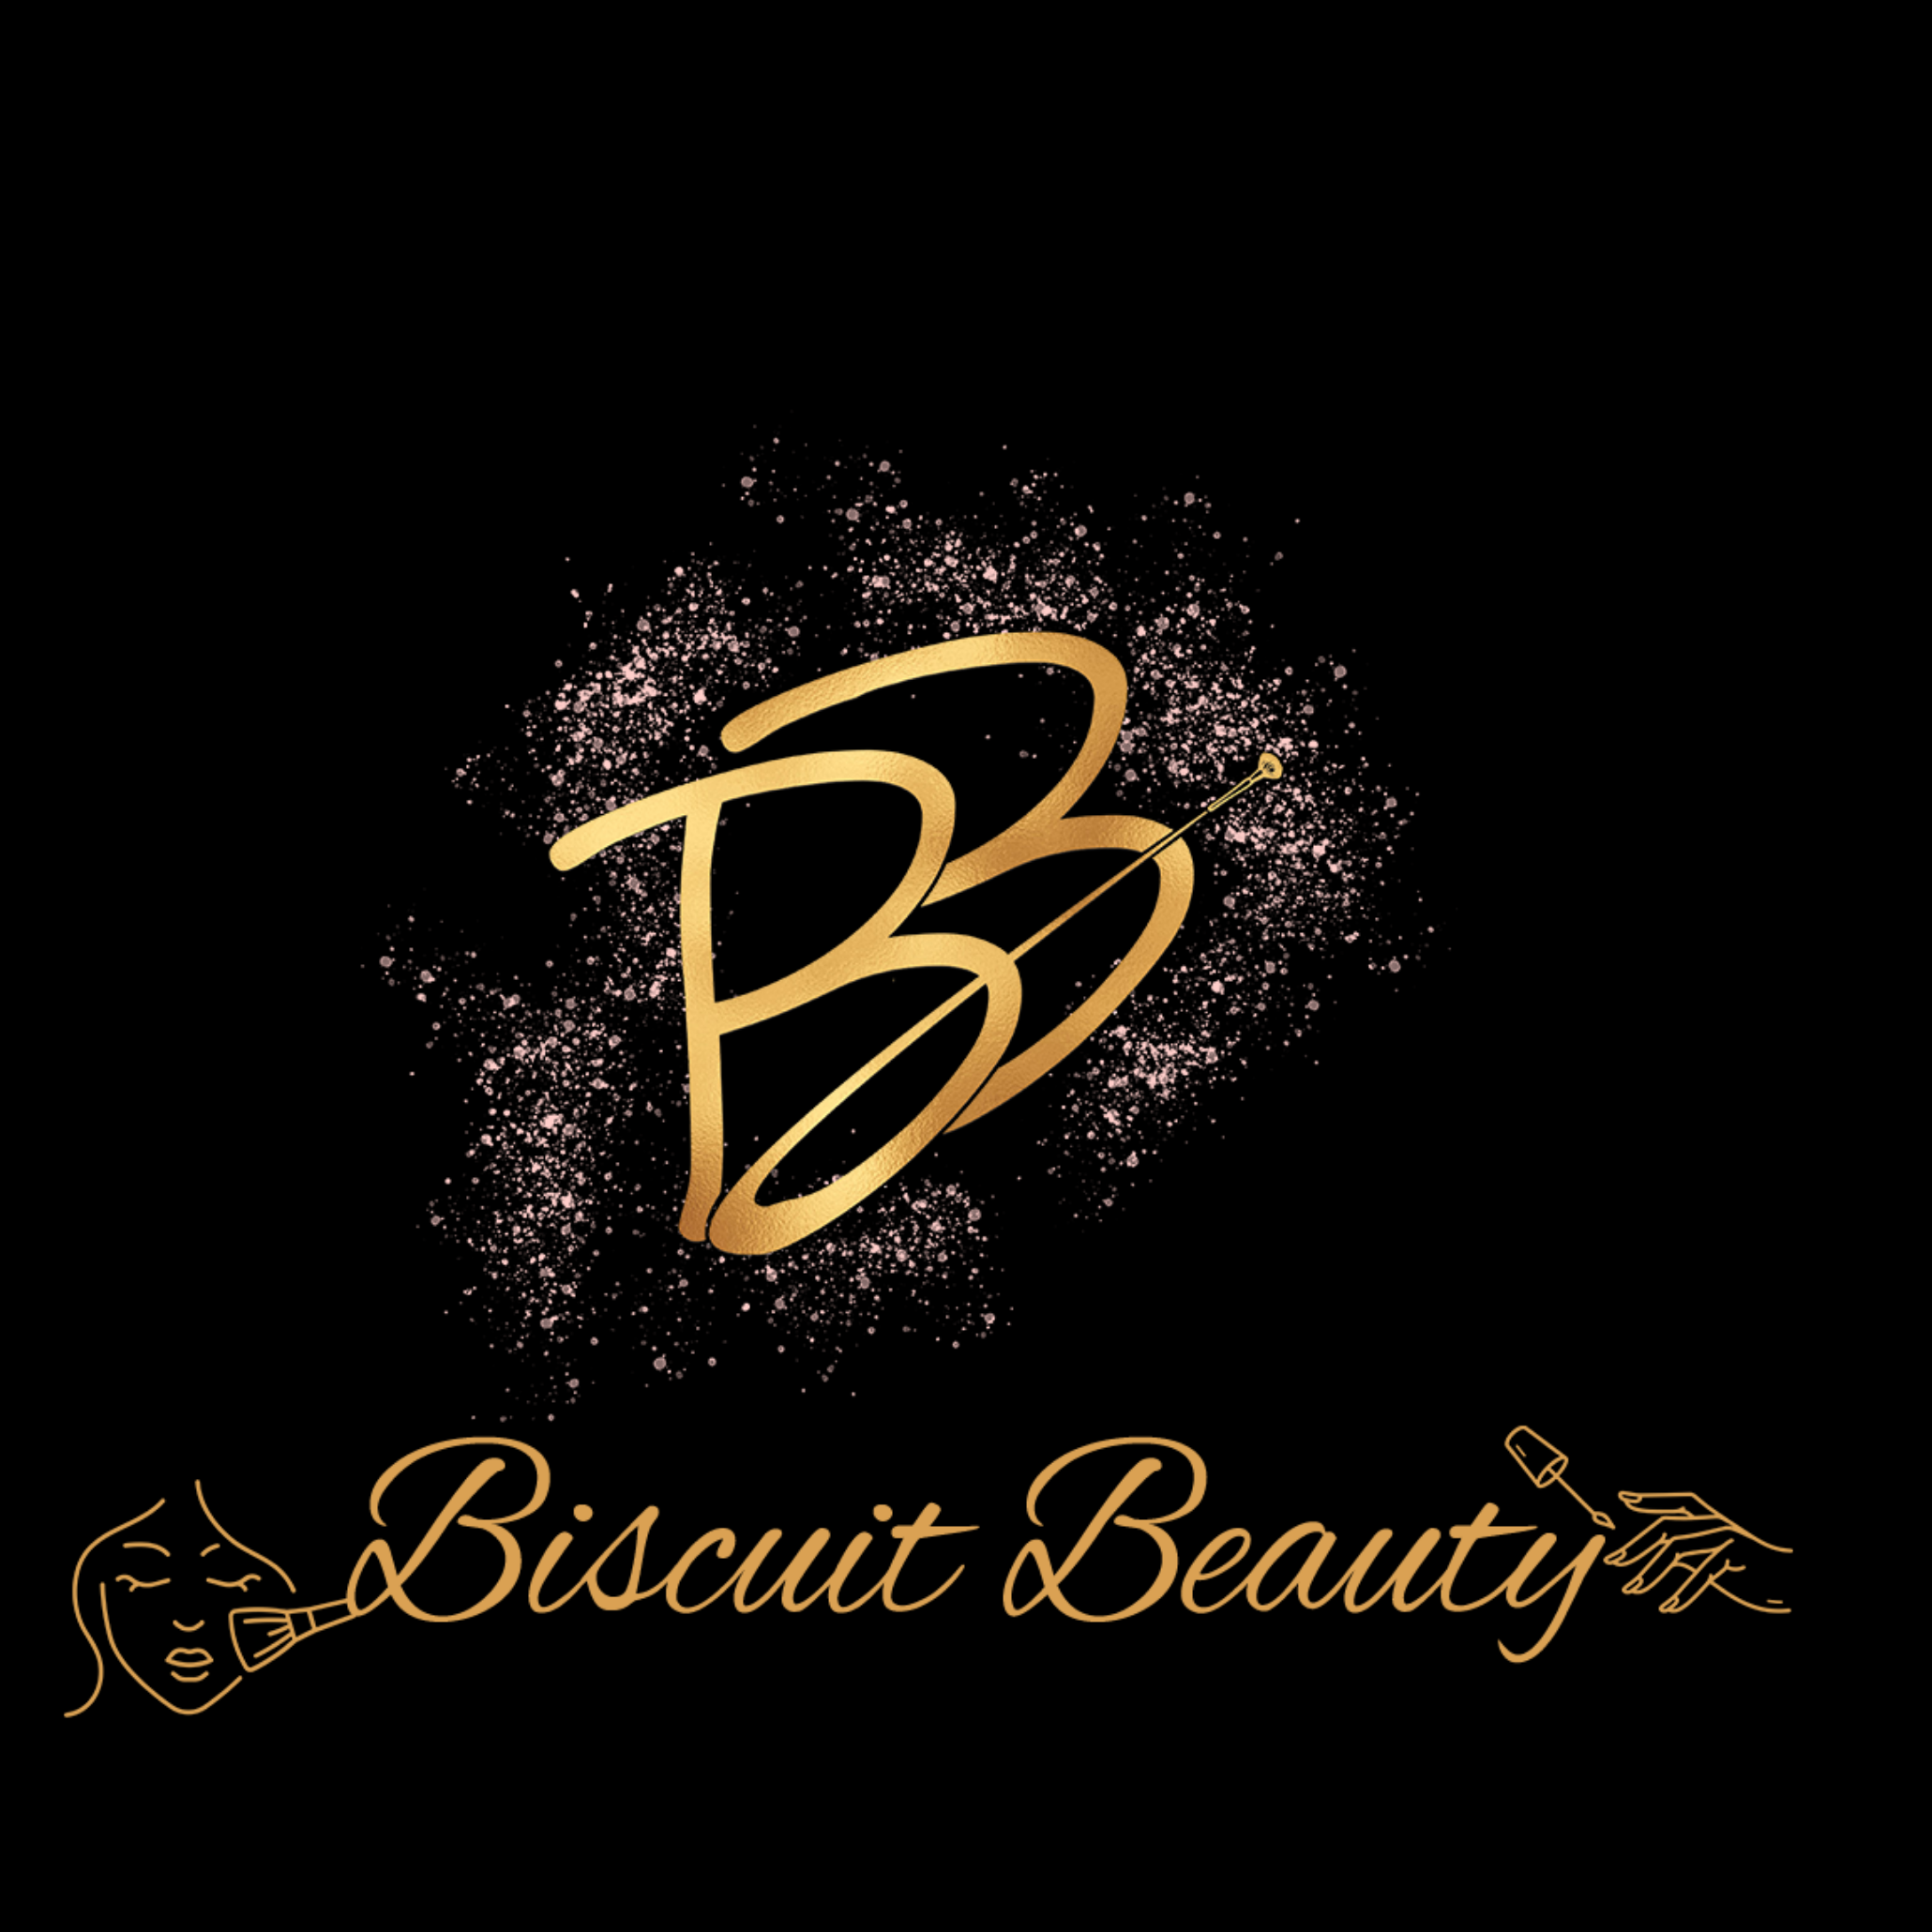 Biscuitbeauty